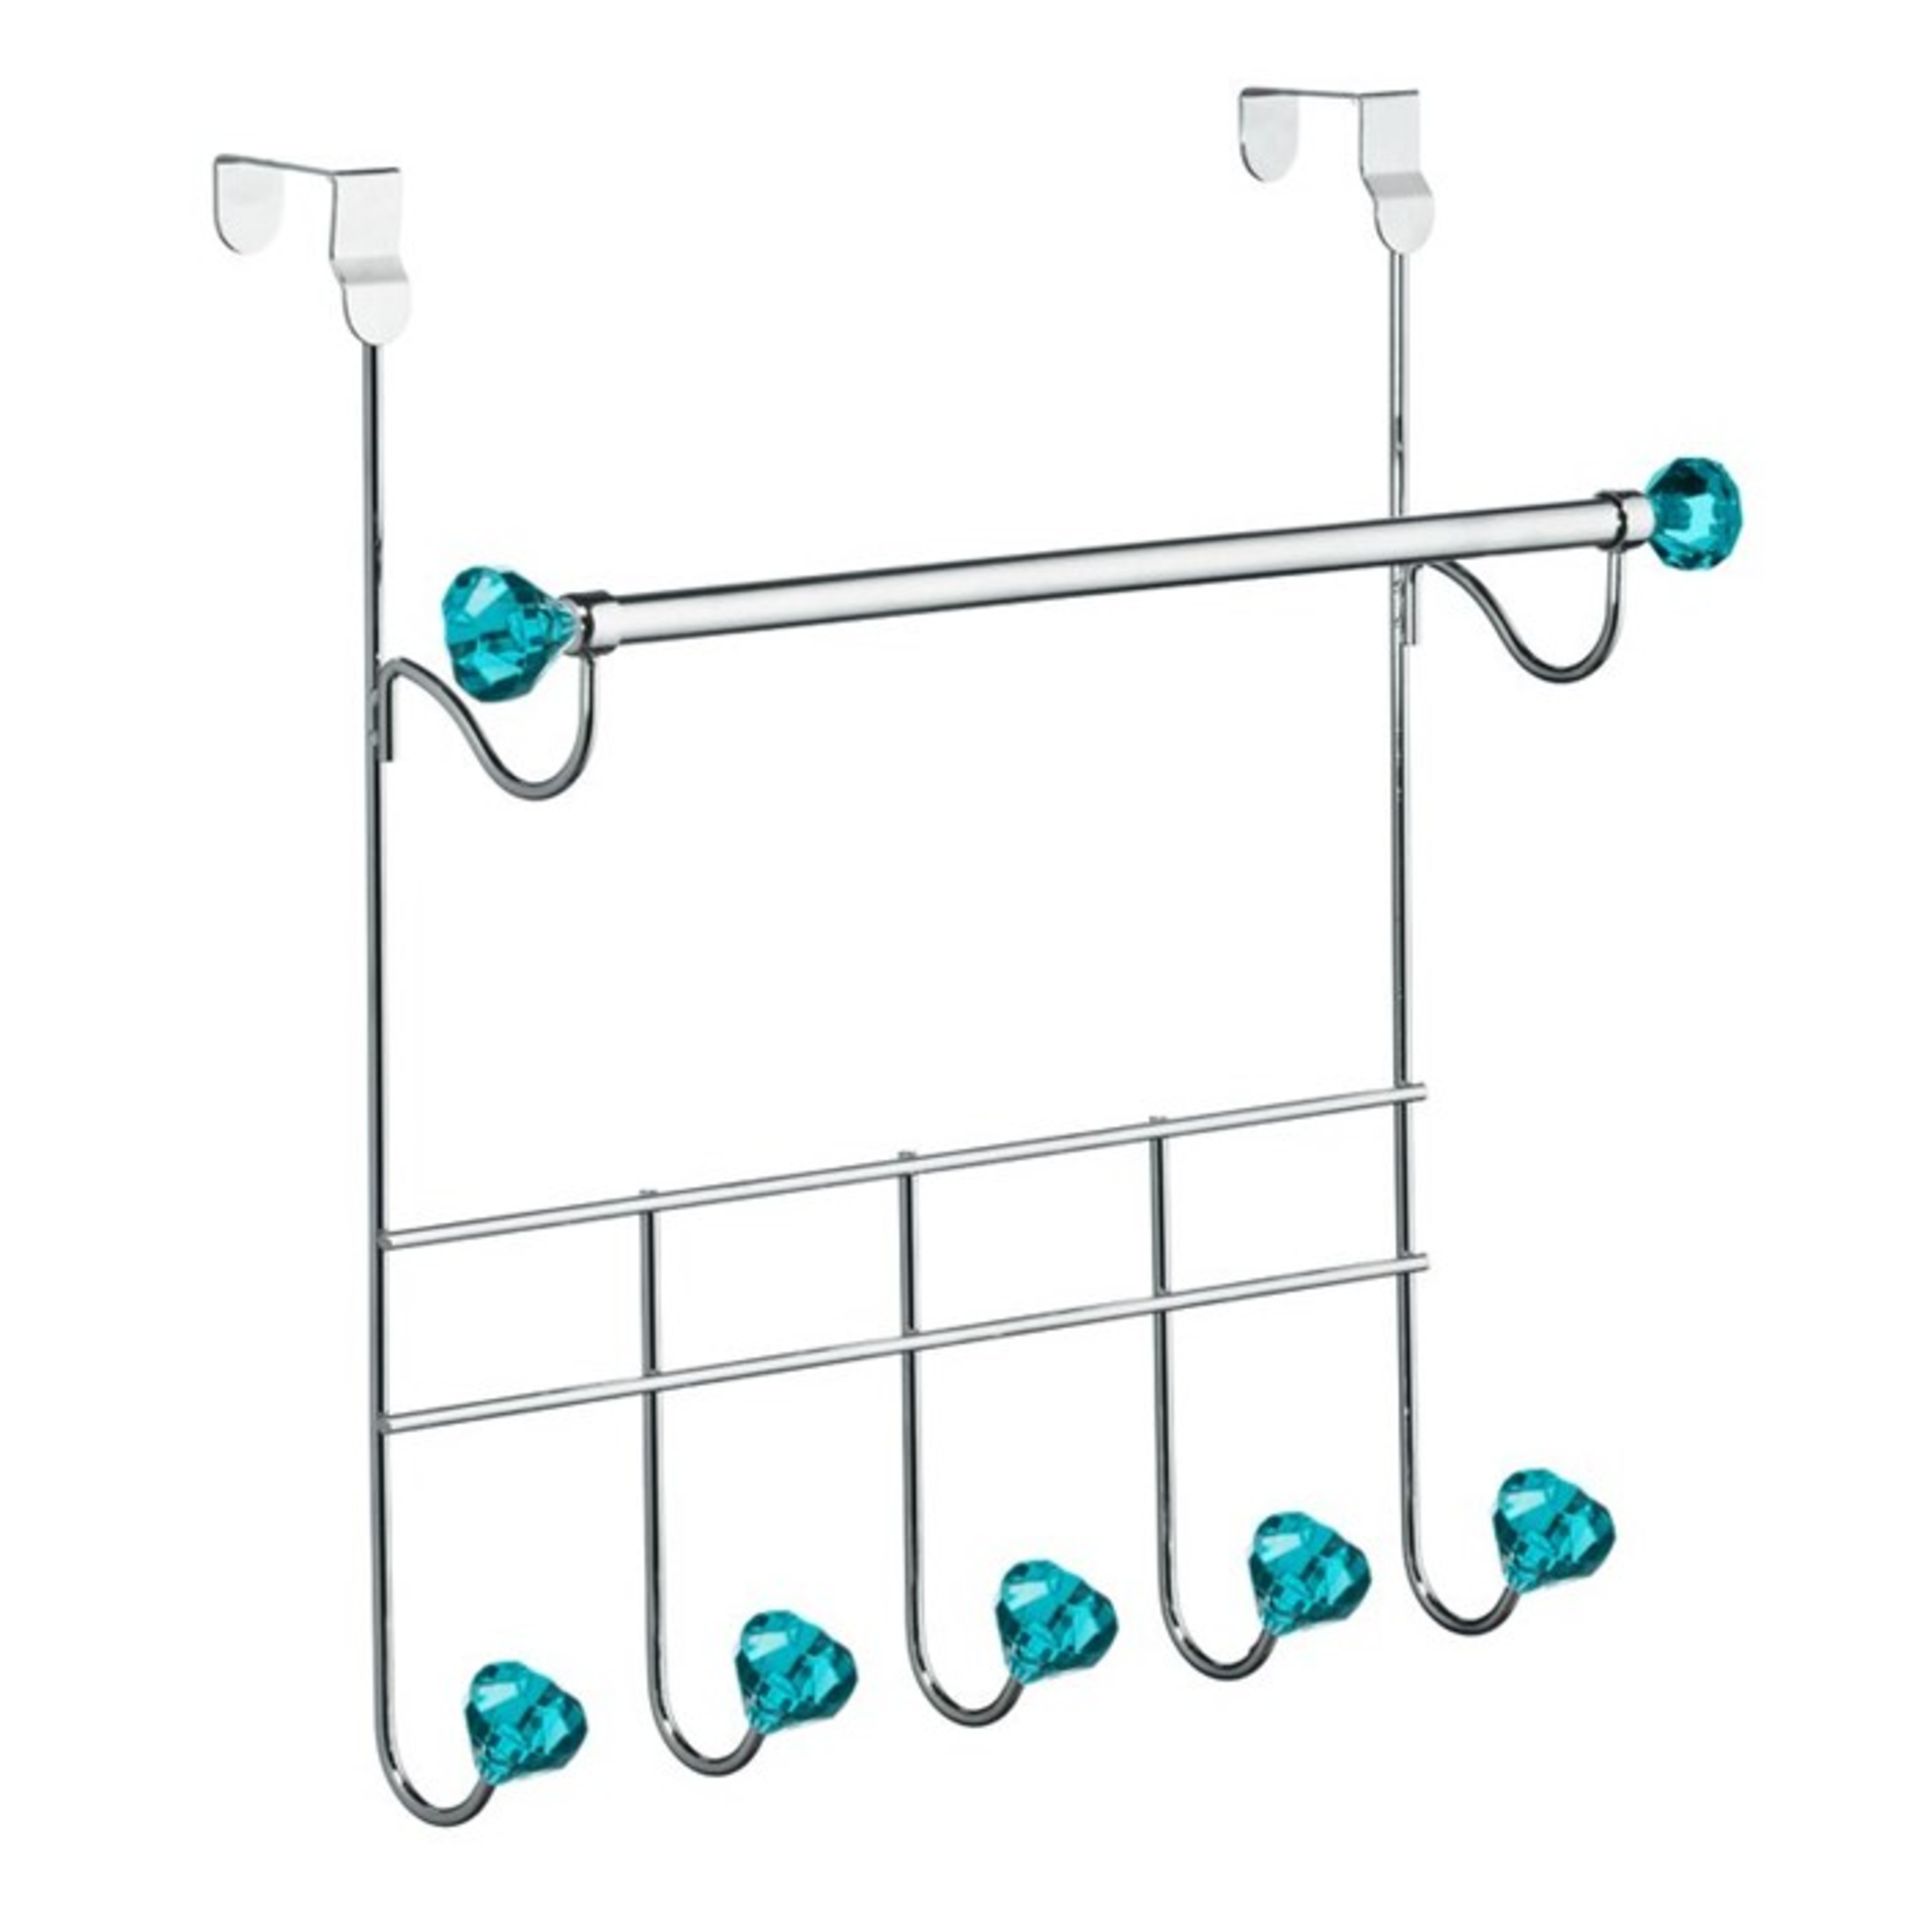 All Home, Over Door Wall Mounted Coat Rack TEAL - RRP £25.99 (AFLH8657 - 17649/43) 3A